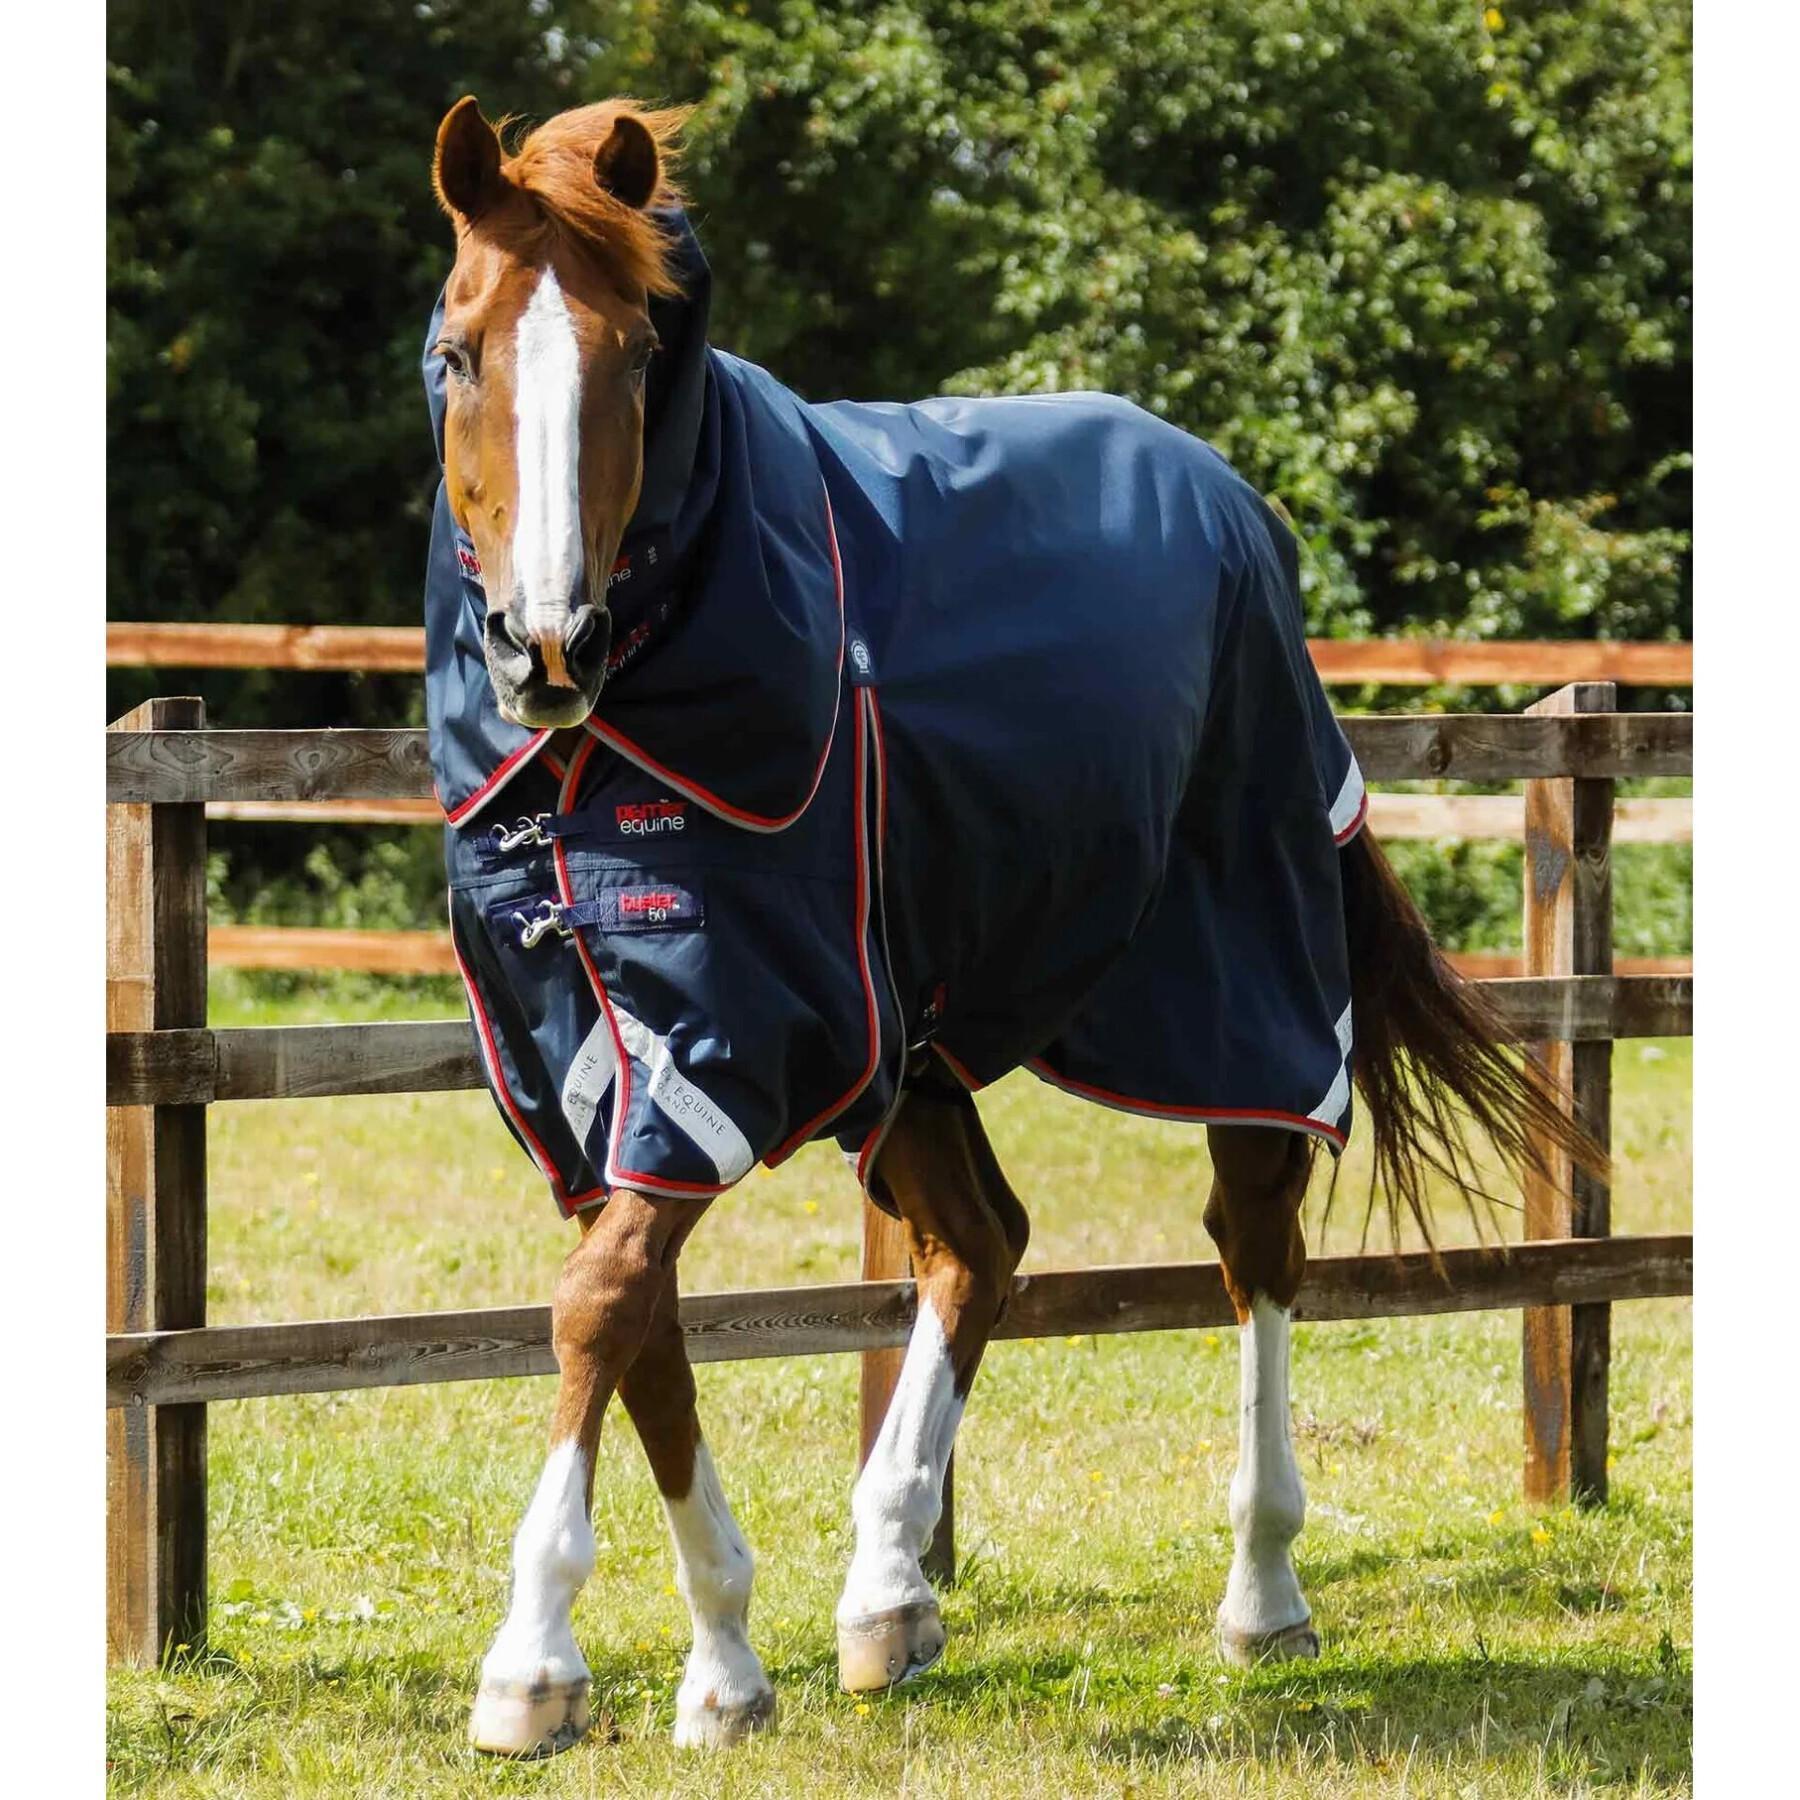 Waterproof outdoor horse blanket with neck cover Premier Equine Buster 50 g